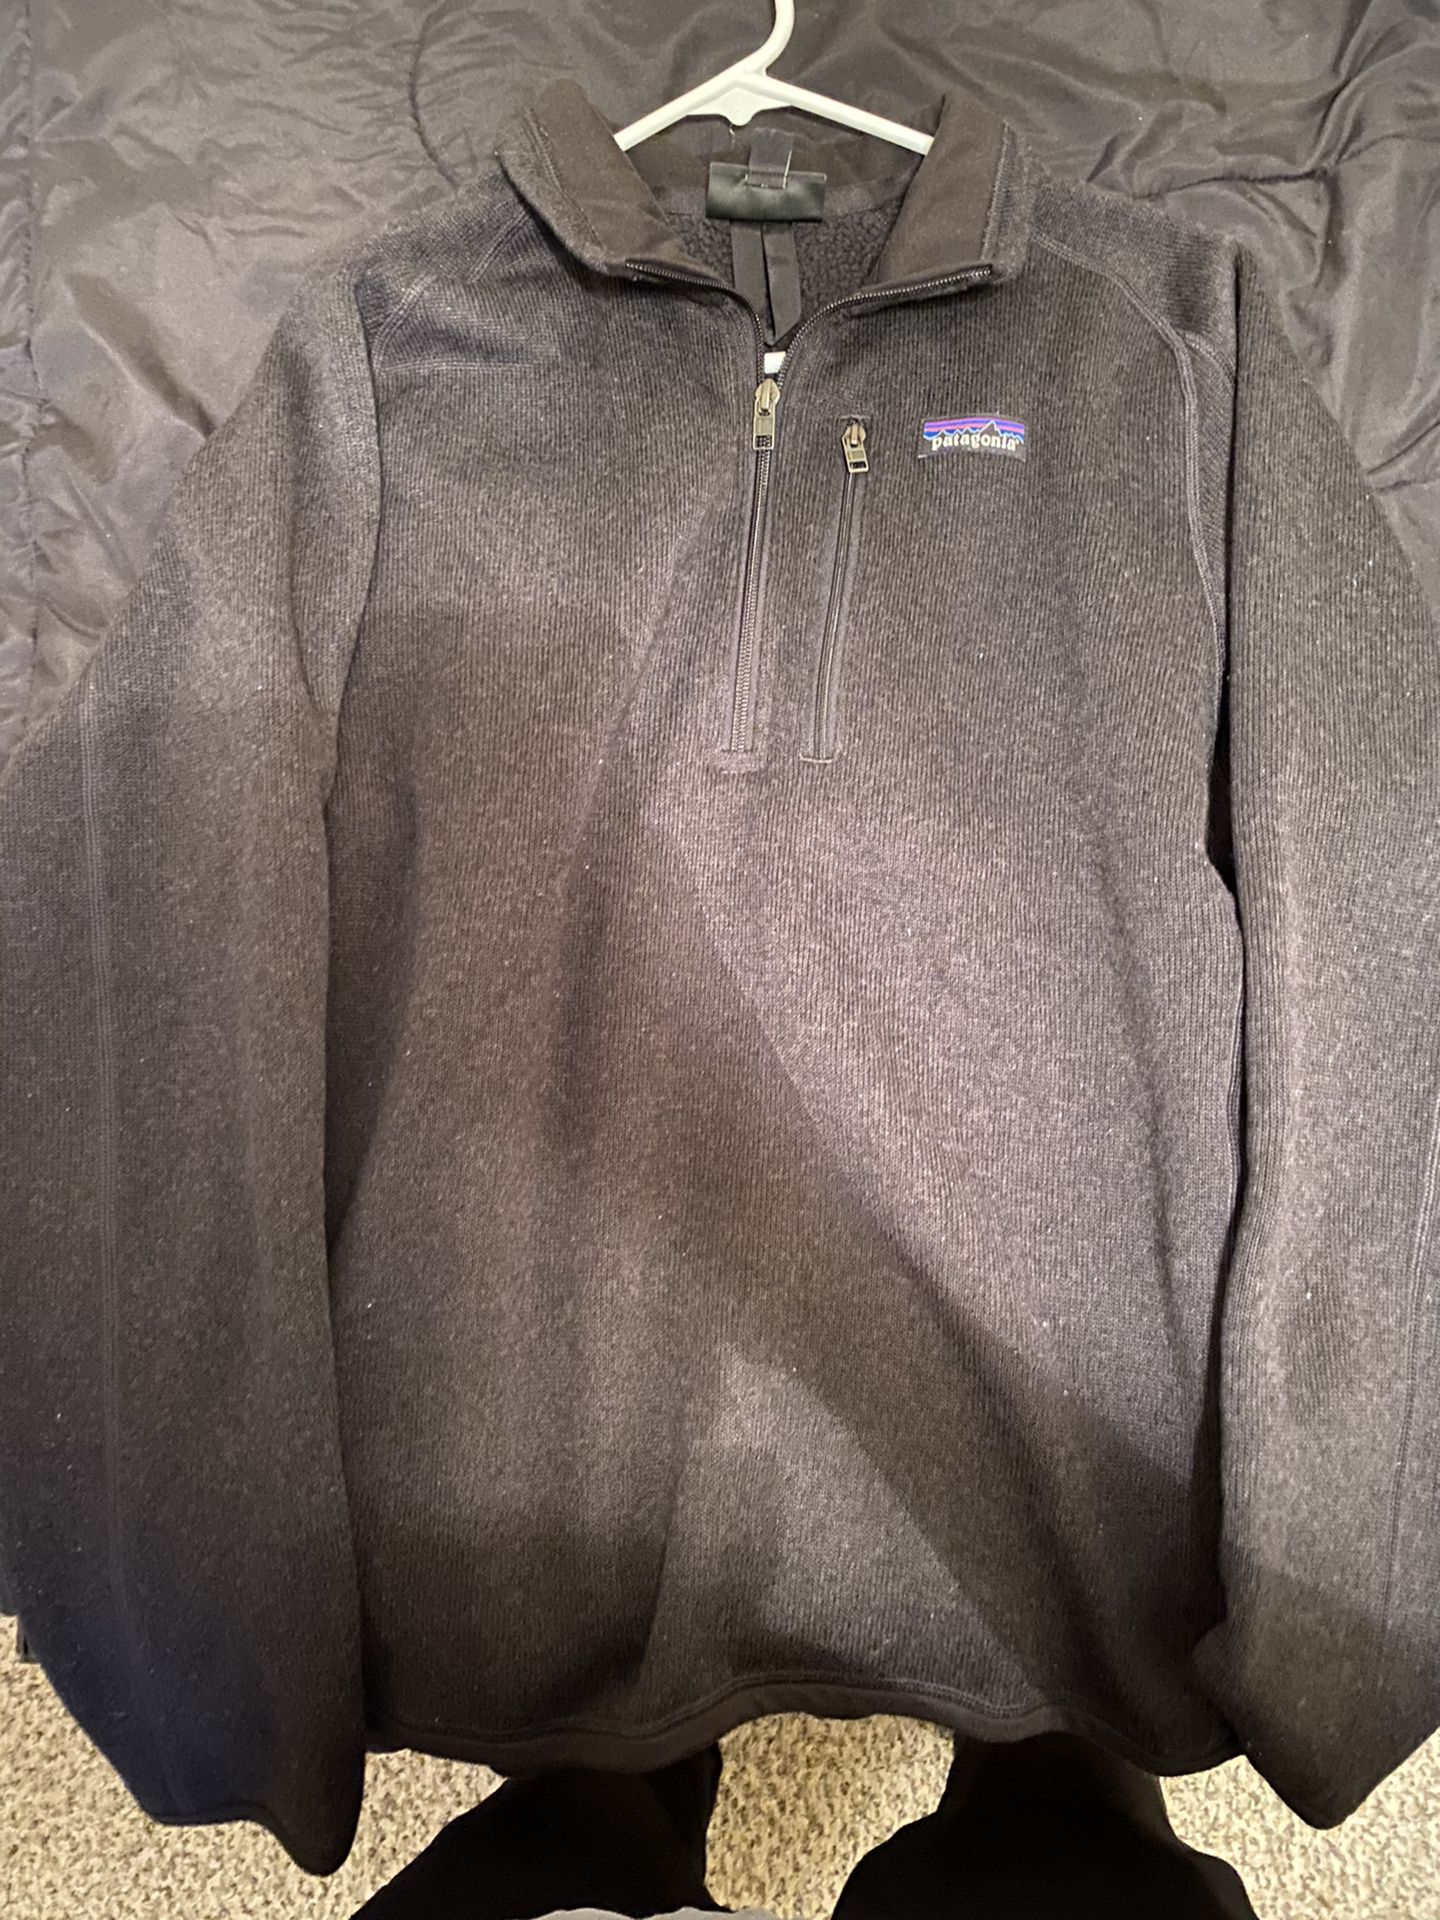 M Patagonia Better Sweater